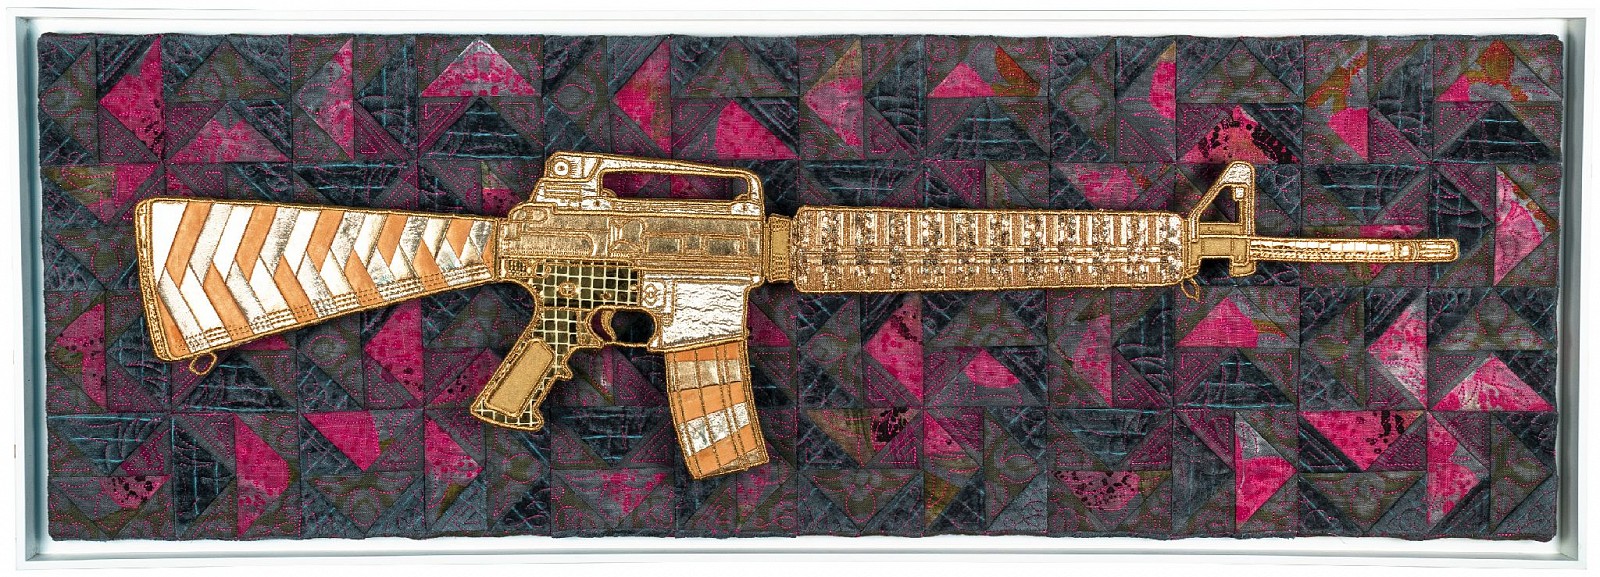 Stephen Wilson, Traditional M16
2015, Mixed Media